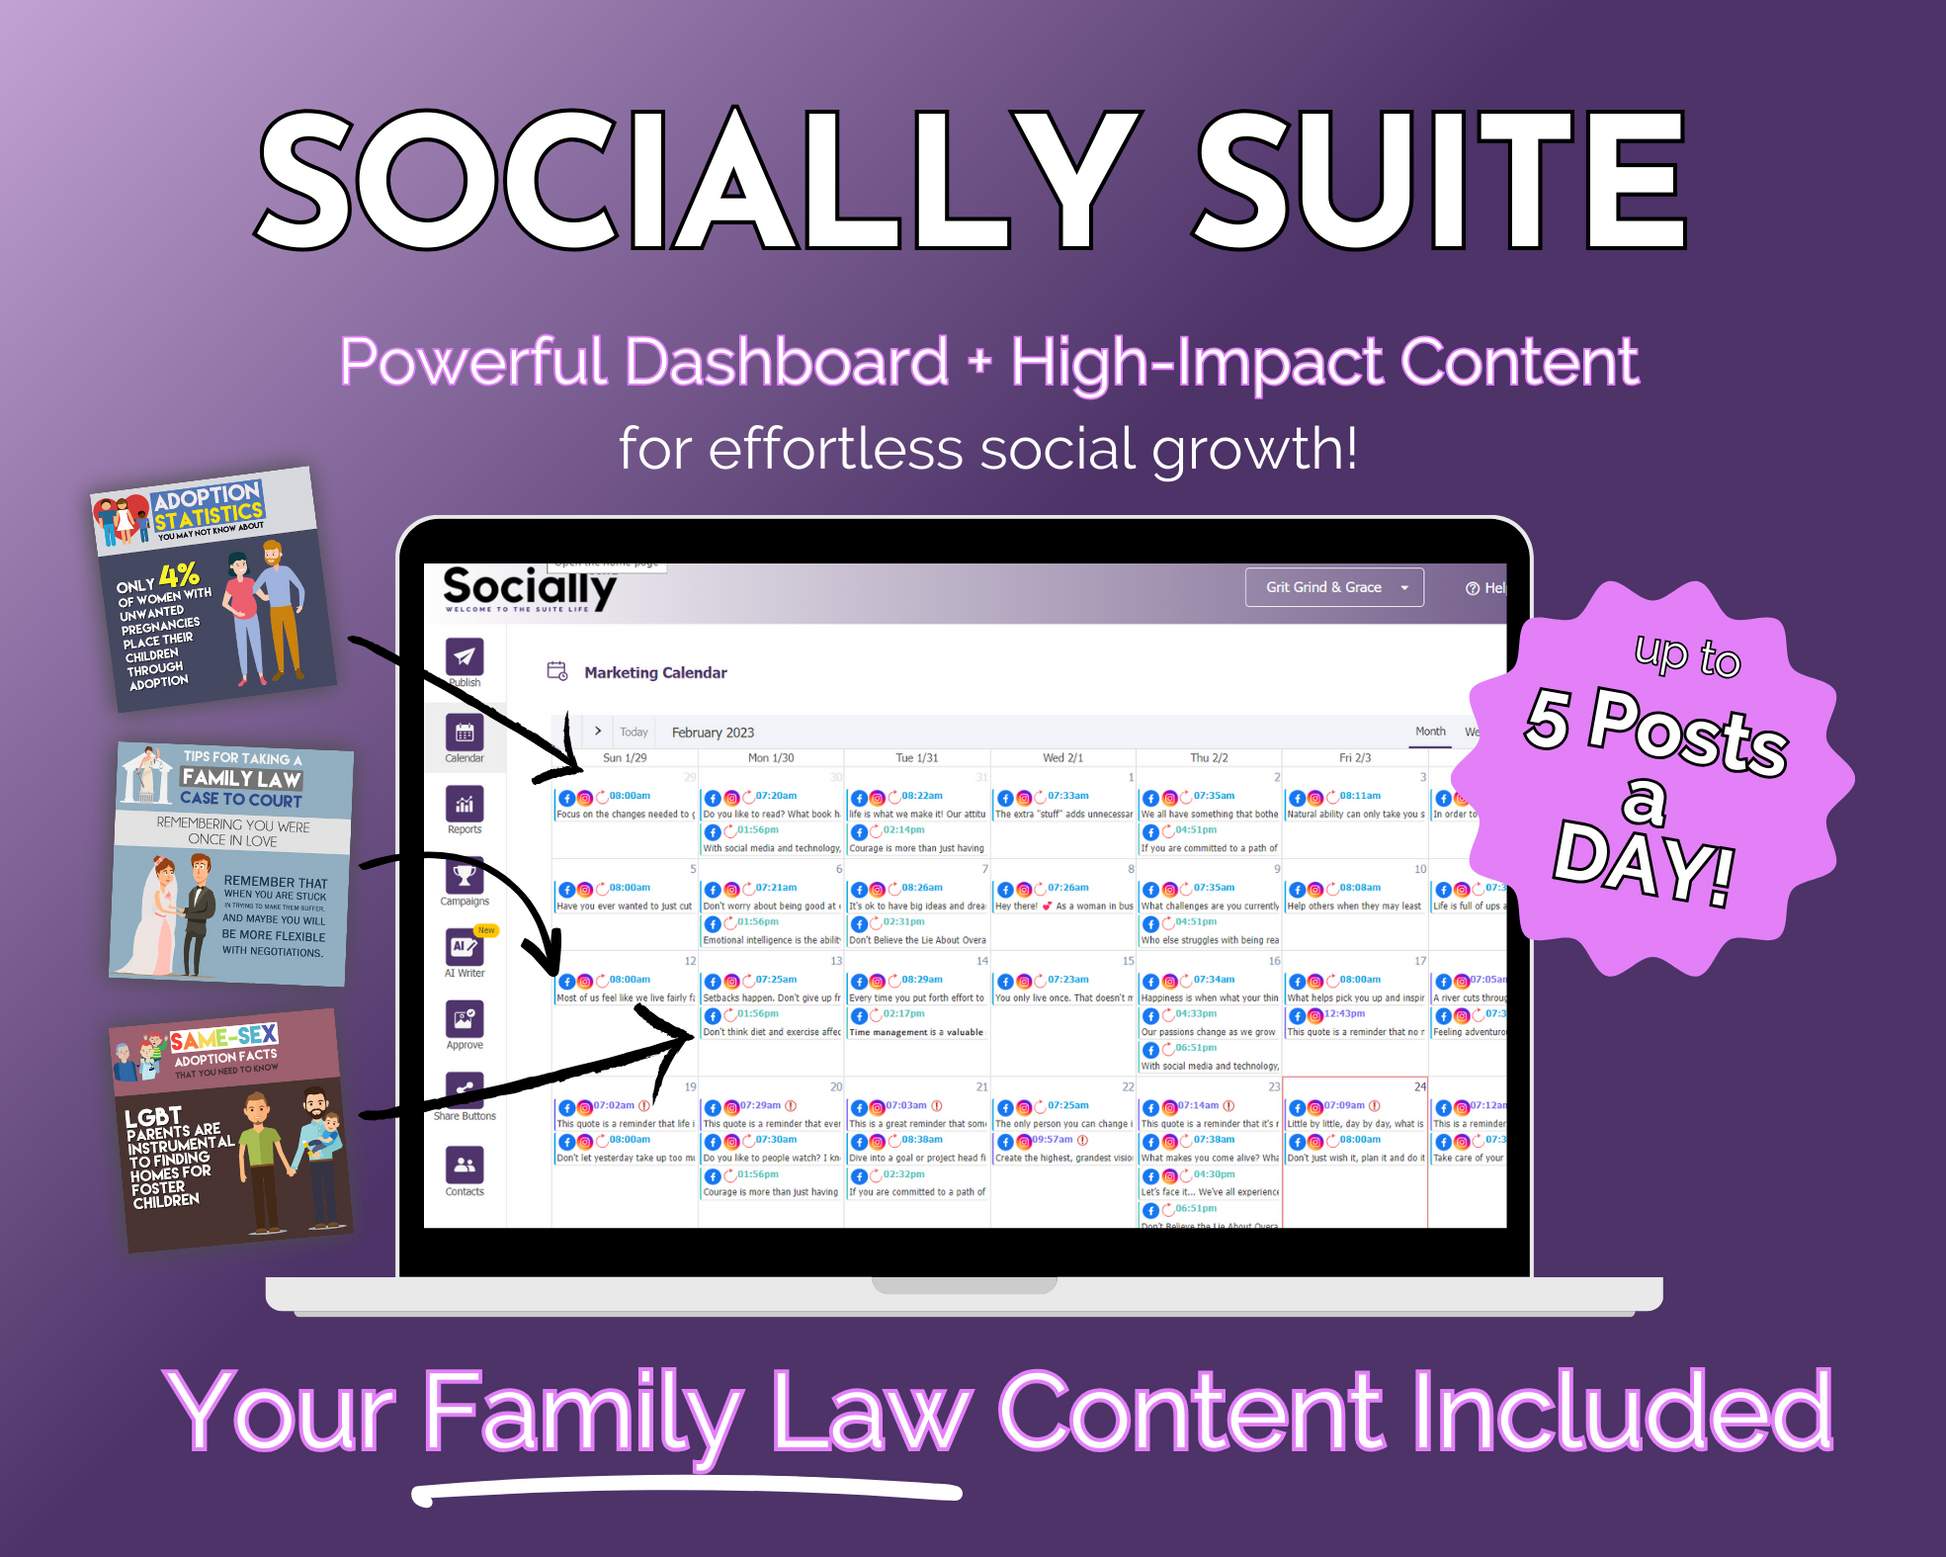 Get Socially Inclined's Socially Suite Membership - a powerful dashboard with high content and family law included. Enhance your online presence and effectively manage your social media marketing with our powerful dashboard. Our platform offers a wide range of features specifically designed for Get Socially Inclined's Socially Suite Membership.